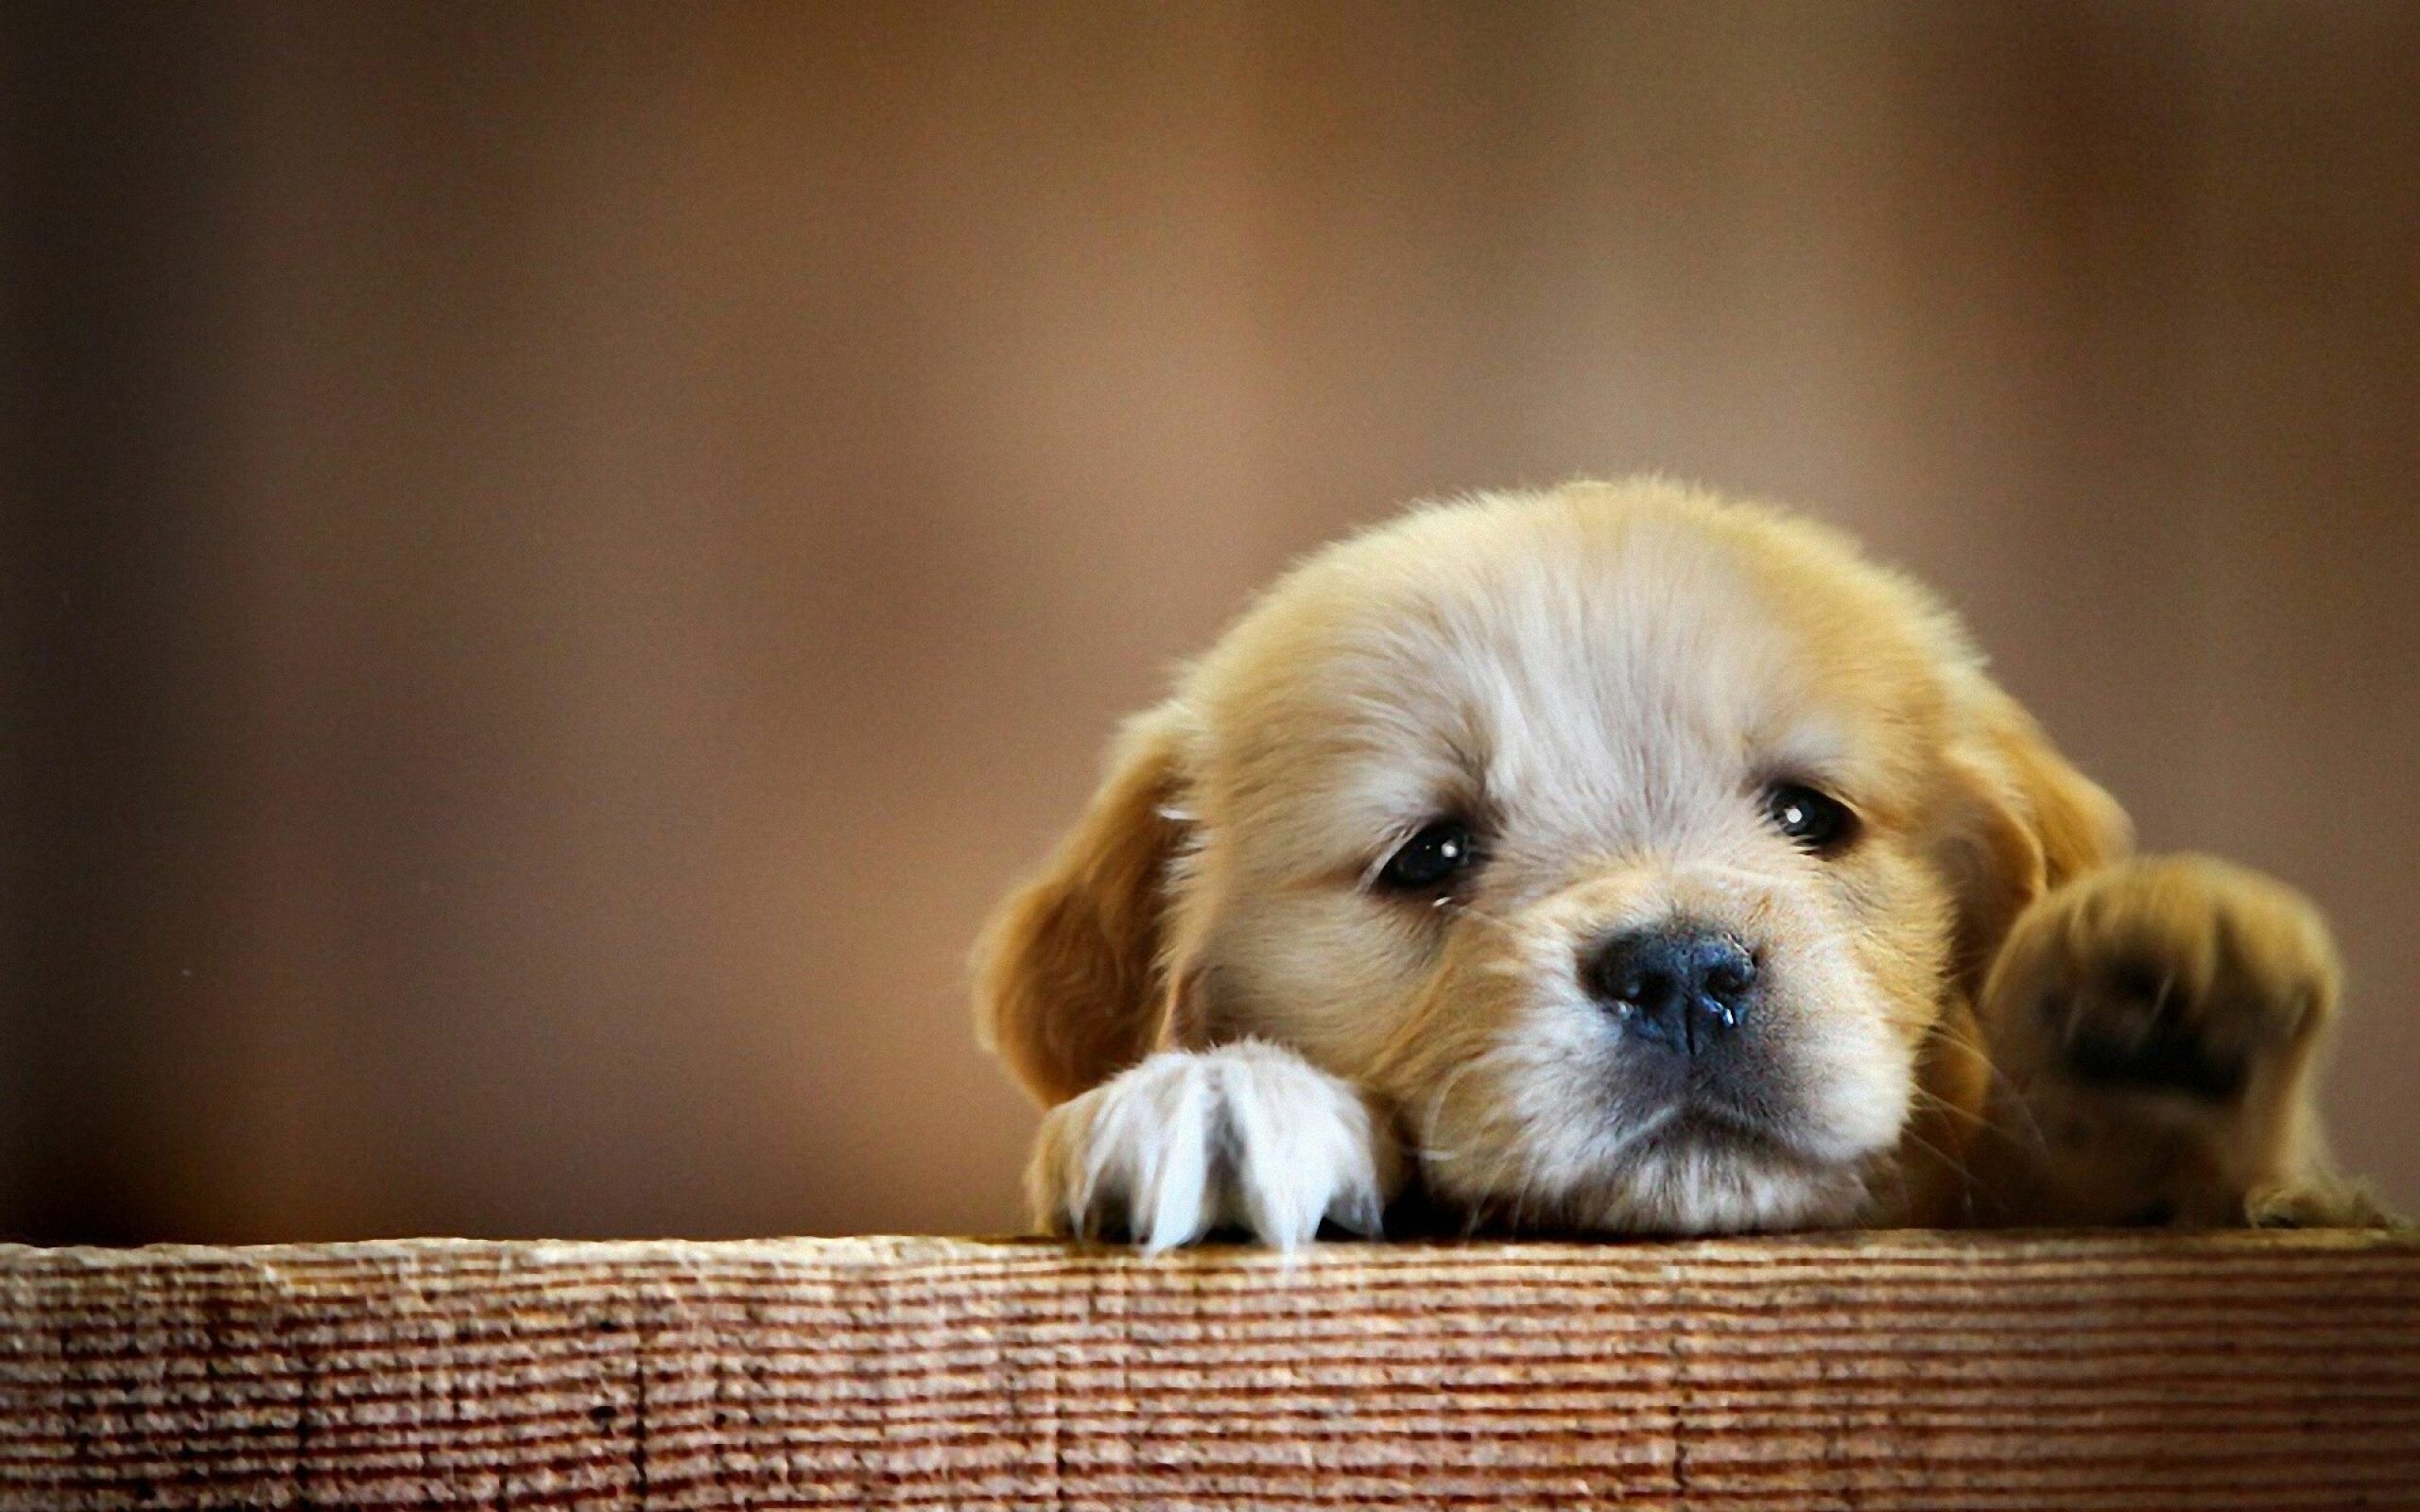 Cute Dog Wallpaper: HD, 4K, 5K for PC and Mobile. Download free image for iPhone, Android